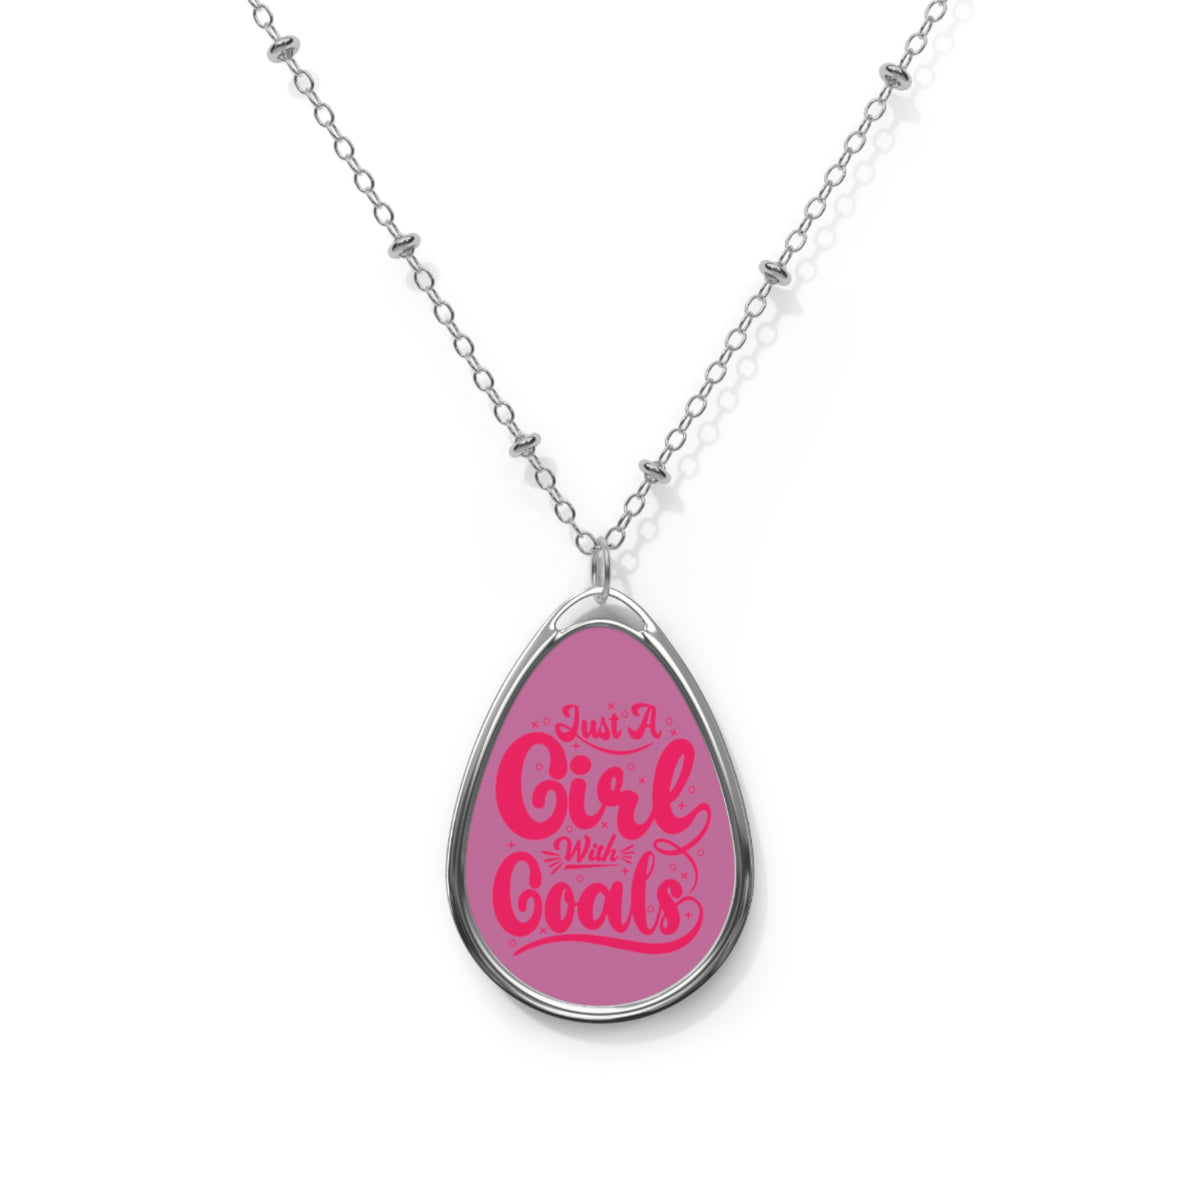 Goals Oval Necklace